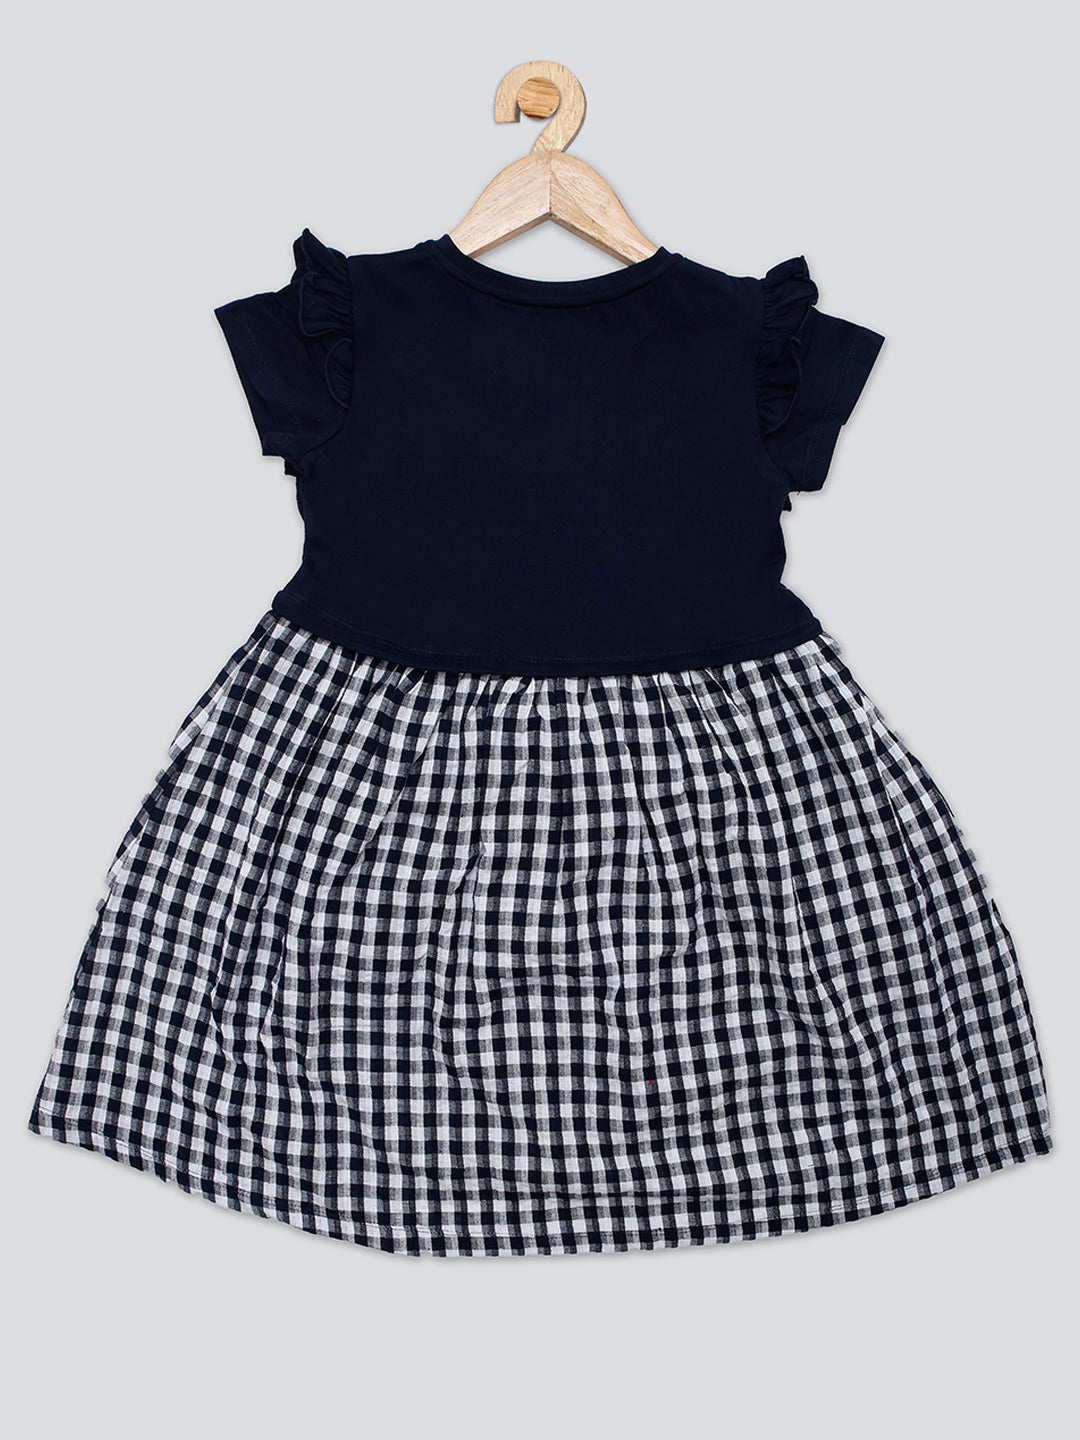 Pampolina Summer Cotton Frock For Baby Girl - Navy